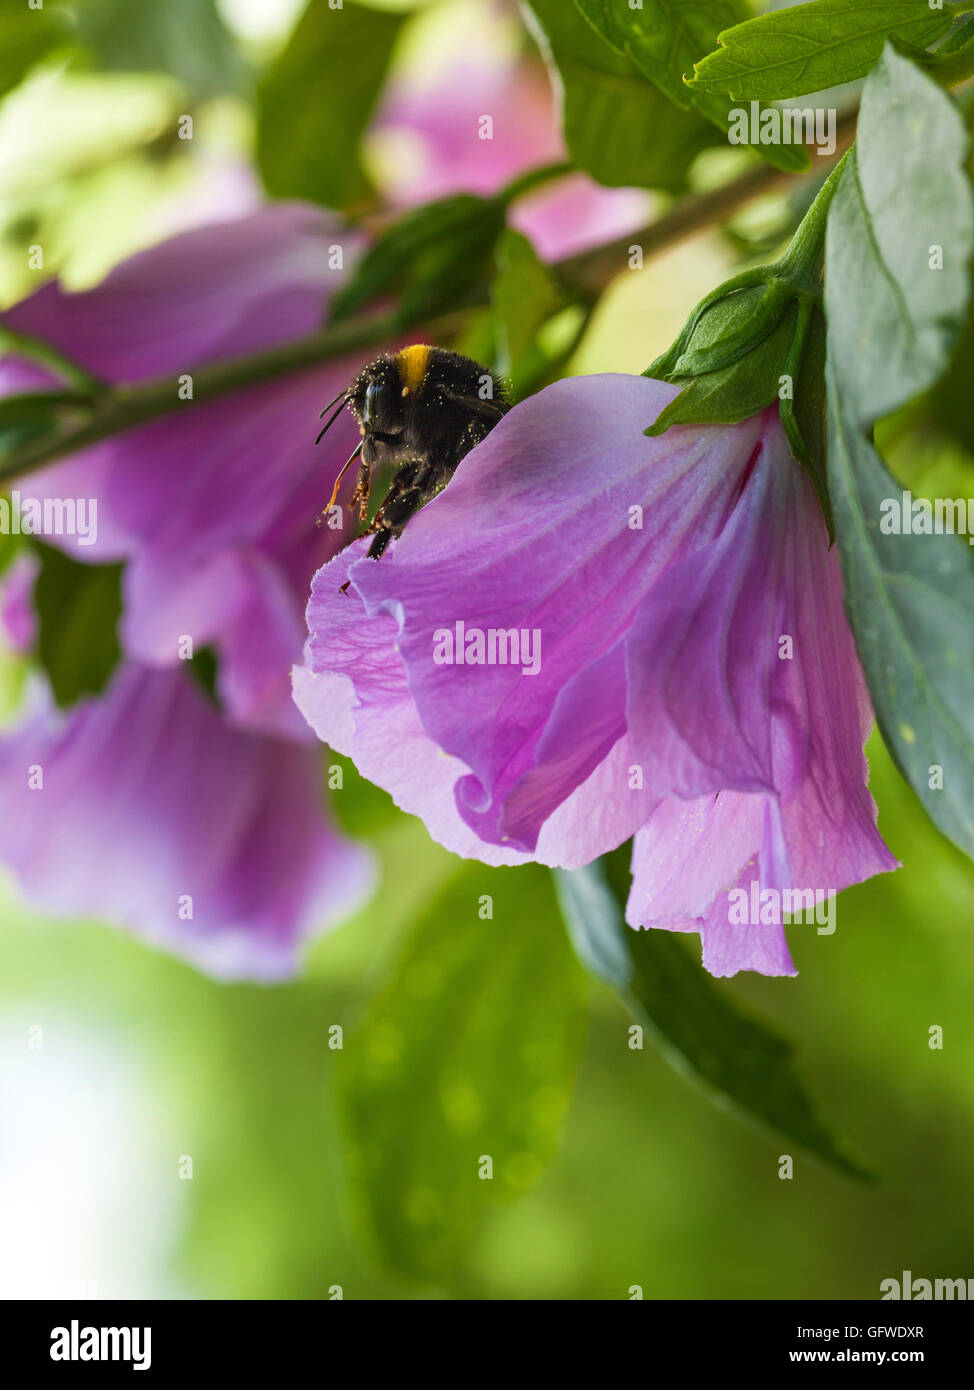 Bumble bee sitting on purple hibiscus blossom Stock Photo